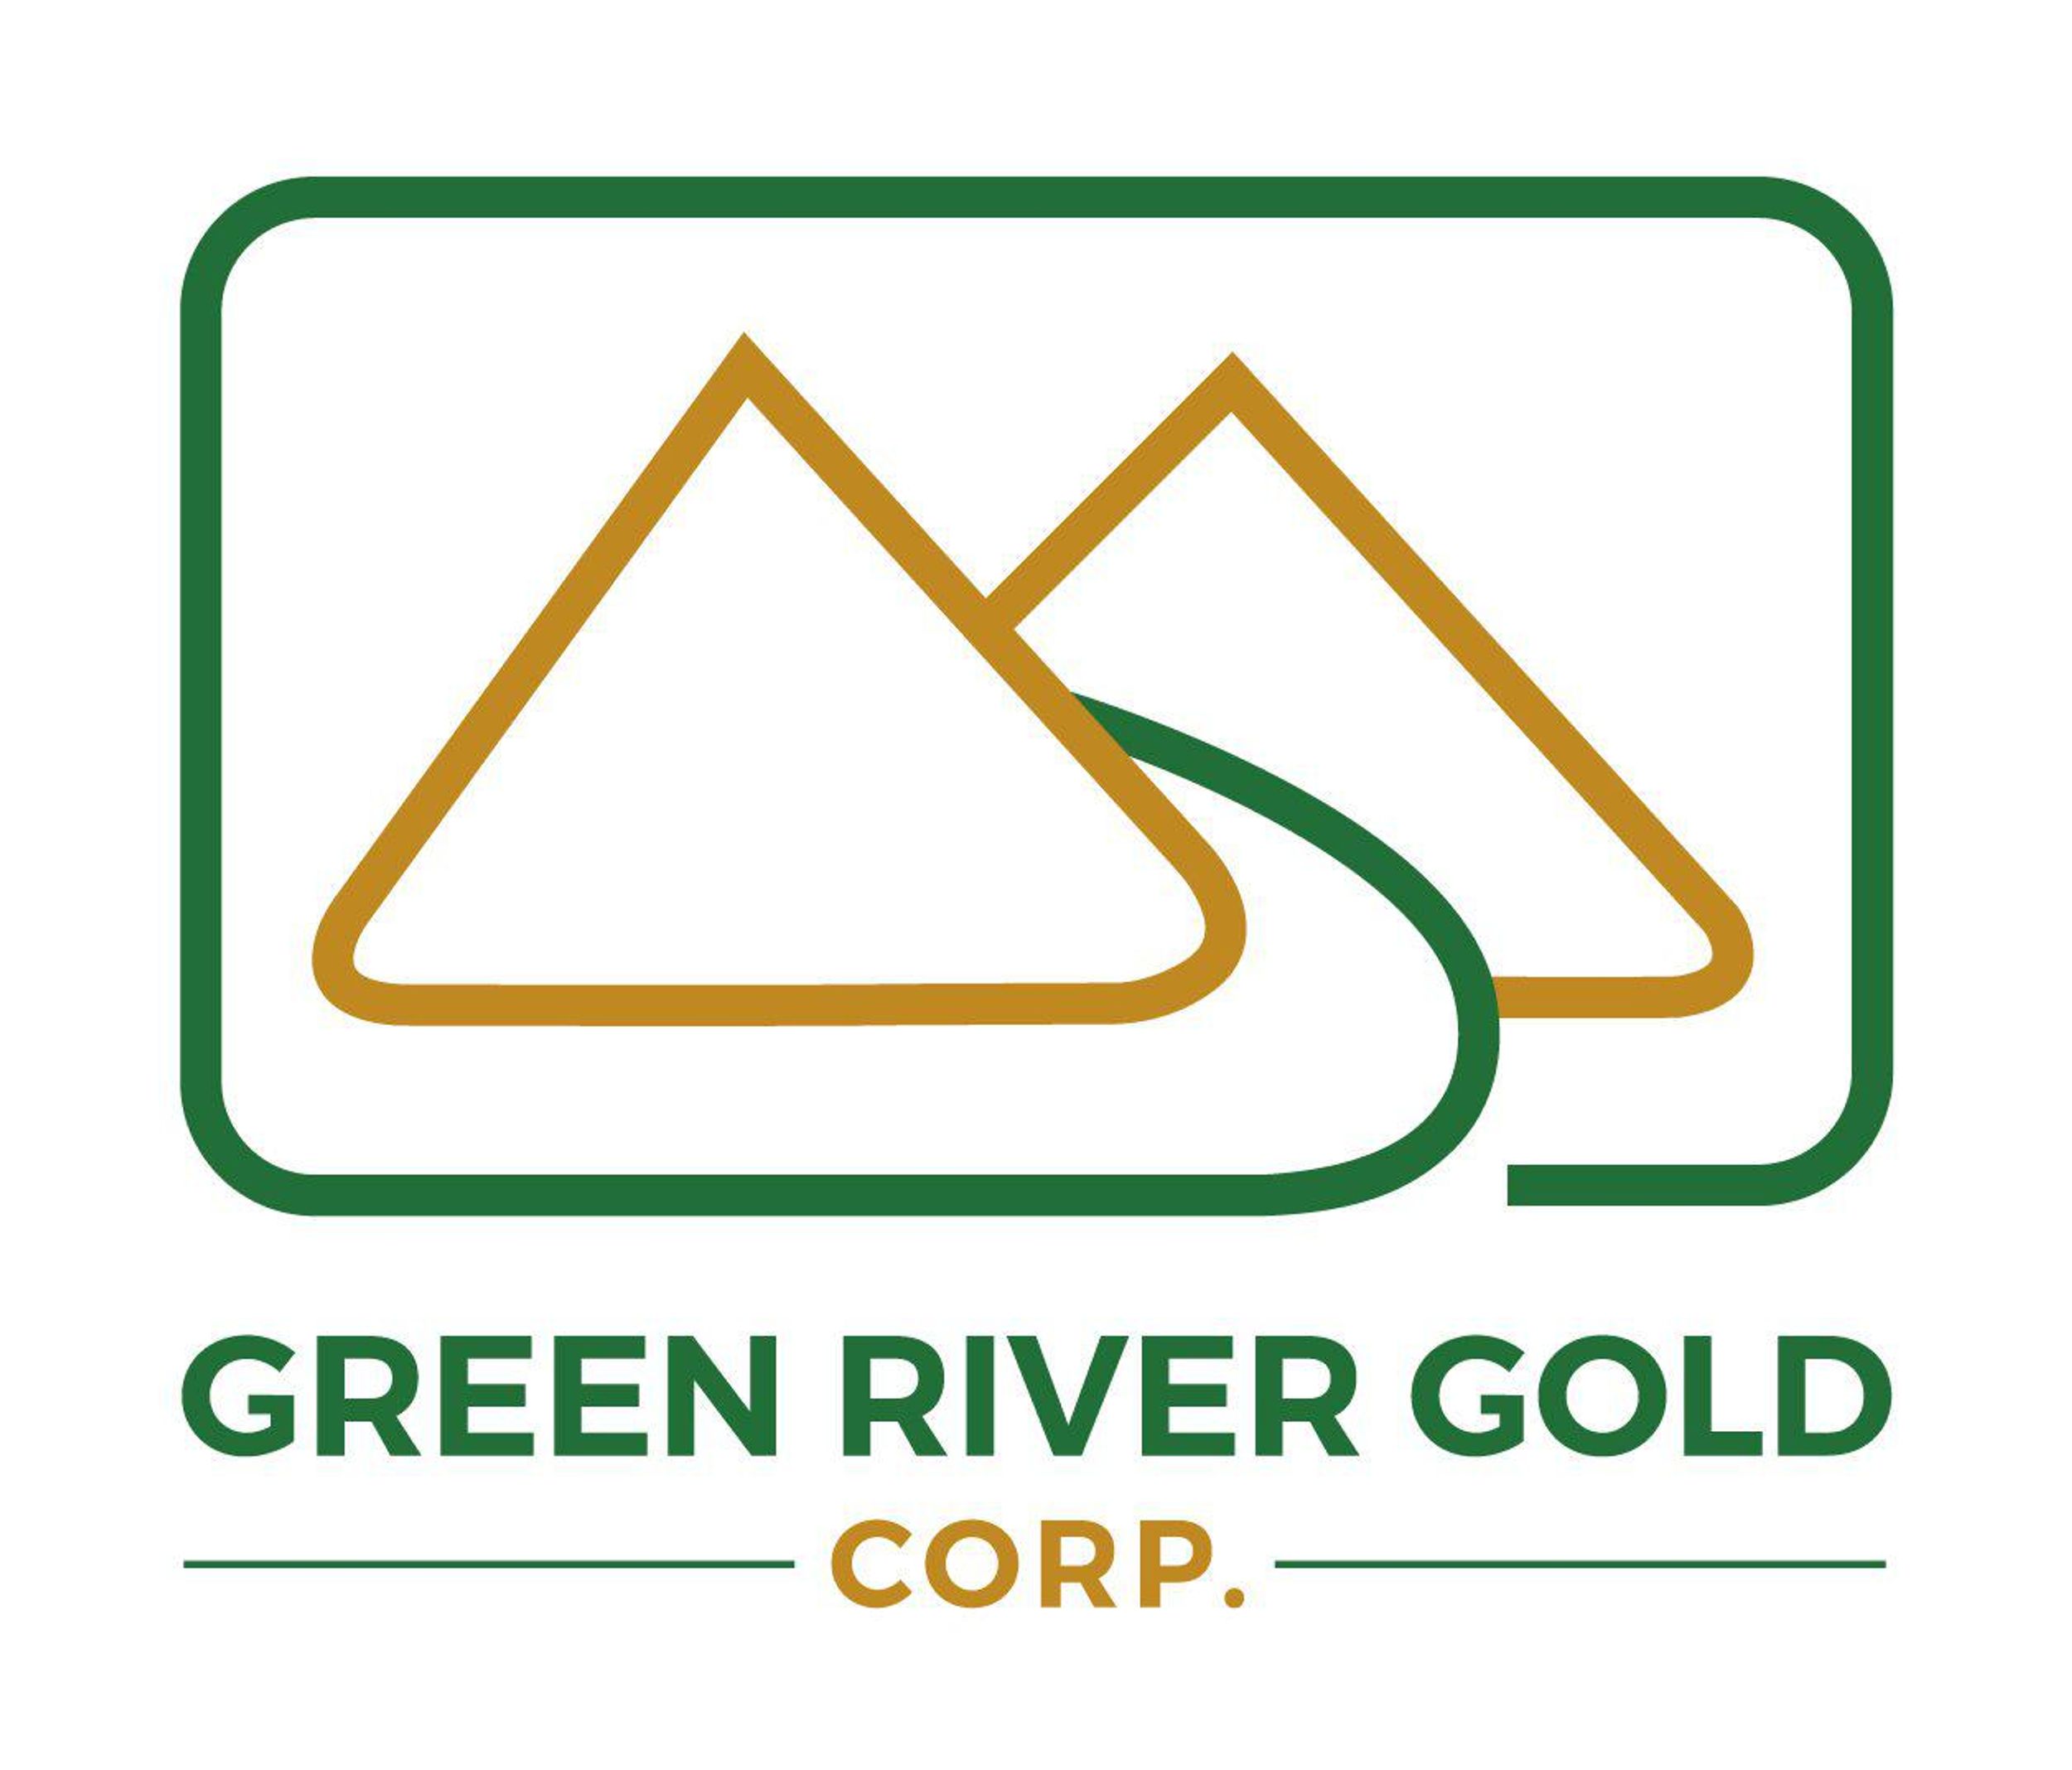 Green River Gold Corp. Announces Final Closing of Oversubscribed Flow-Through Private Placement of Units and Final Closing of Non Flow-Through Private Placement of Units